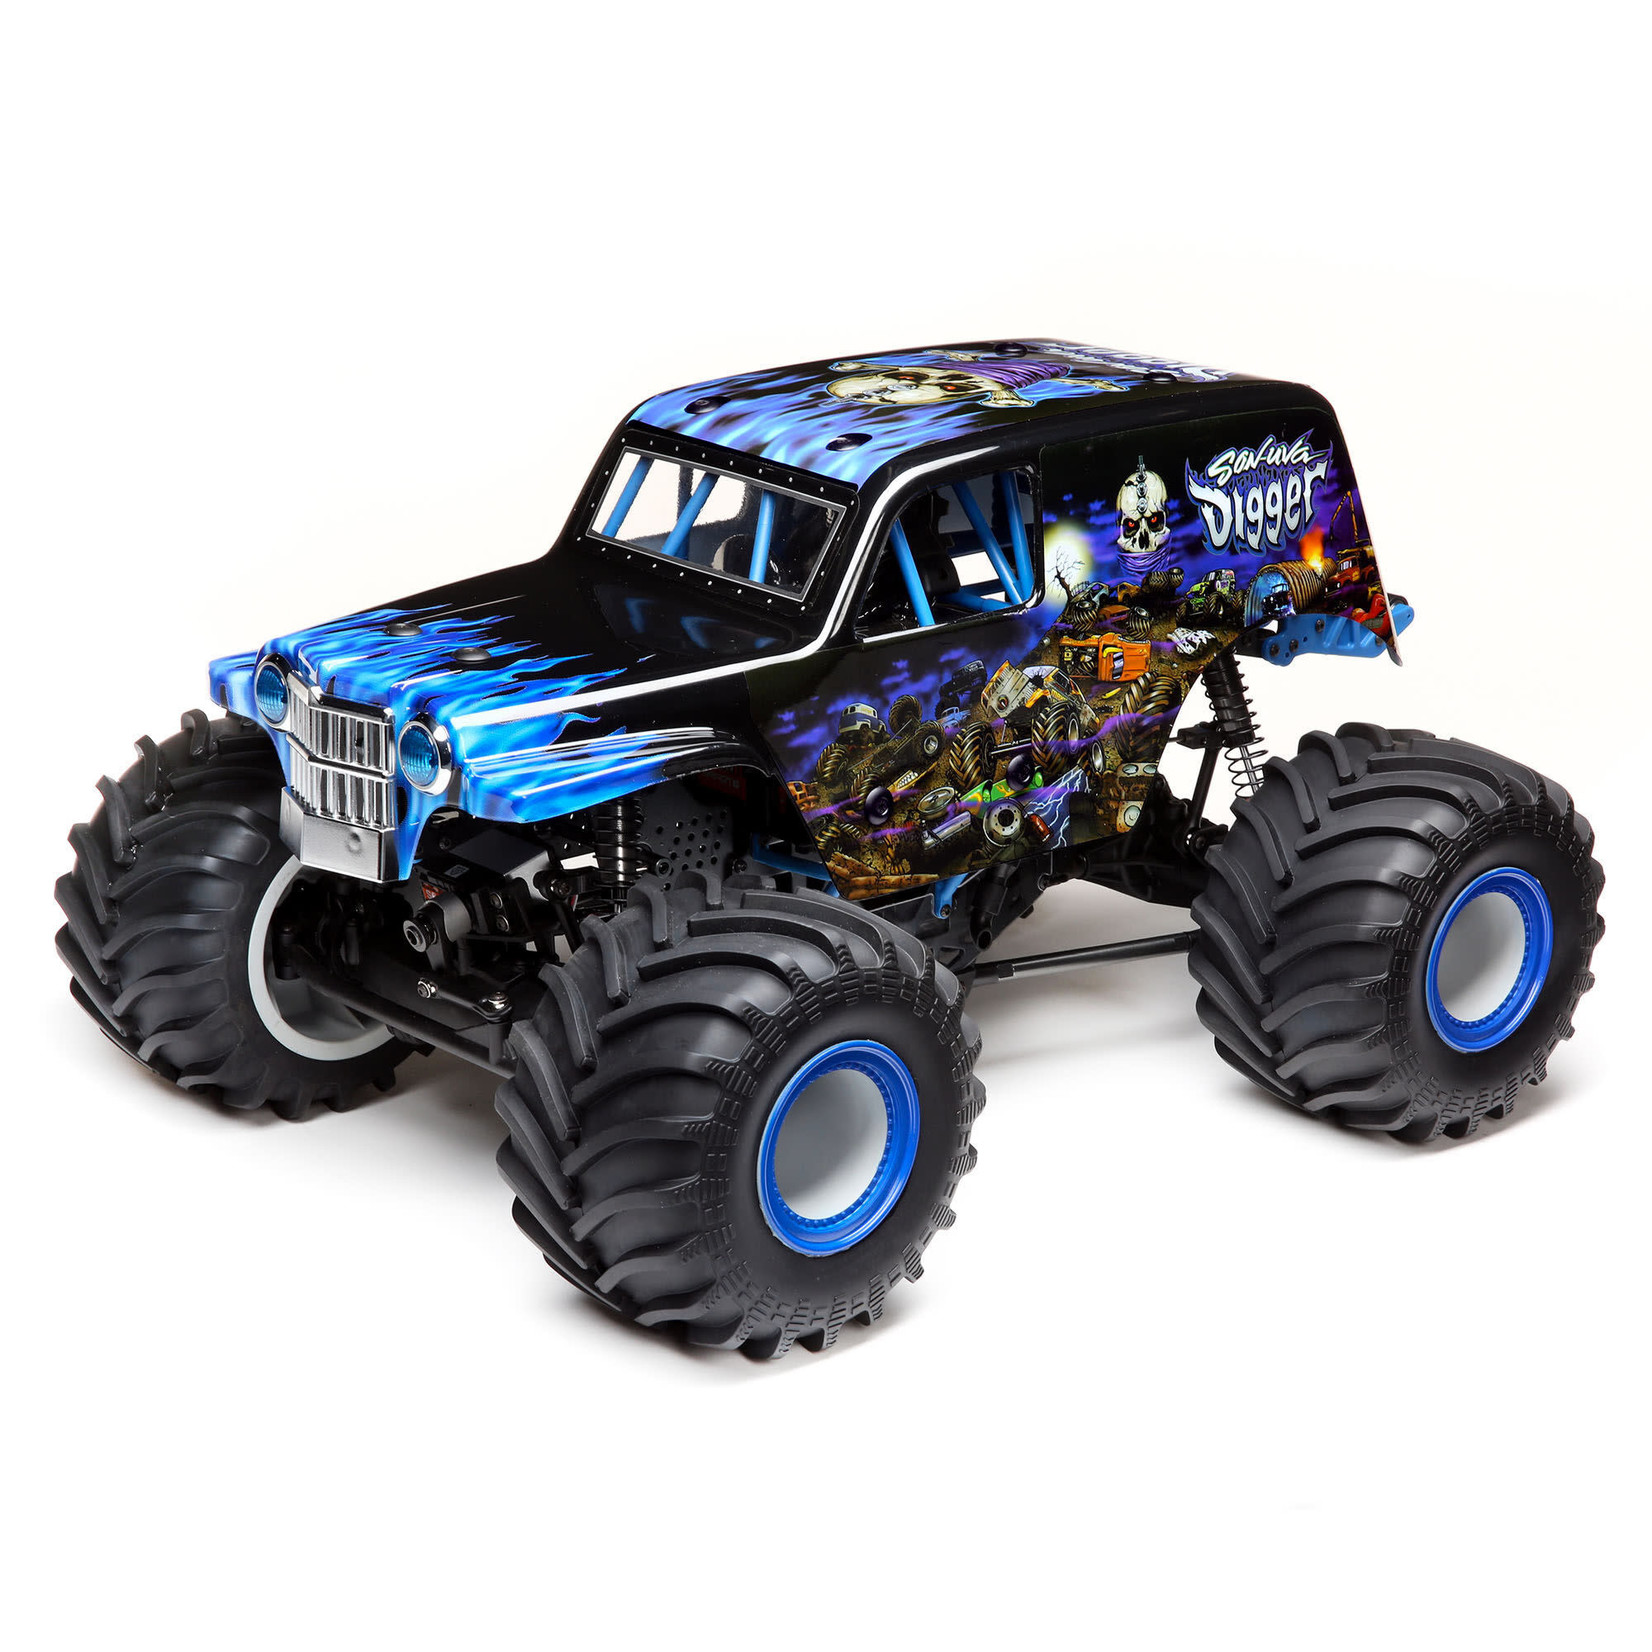 Team Losi LMT: 4wd Solid Axle Monster Truck, SonUvaDigger: RTR